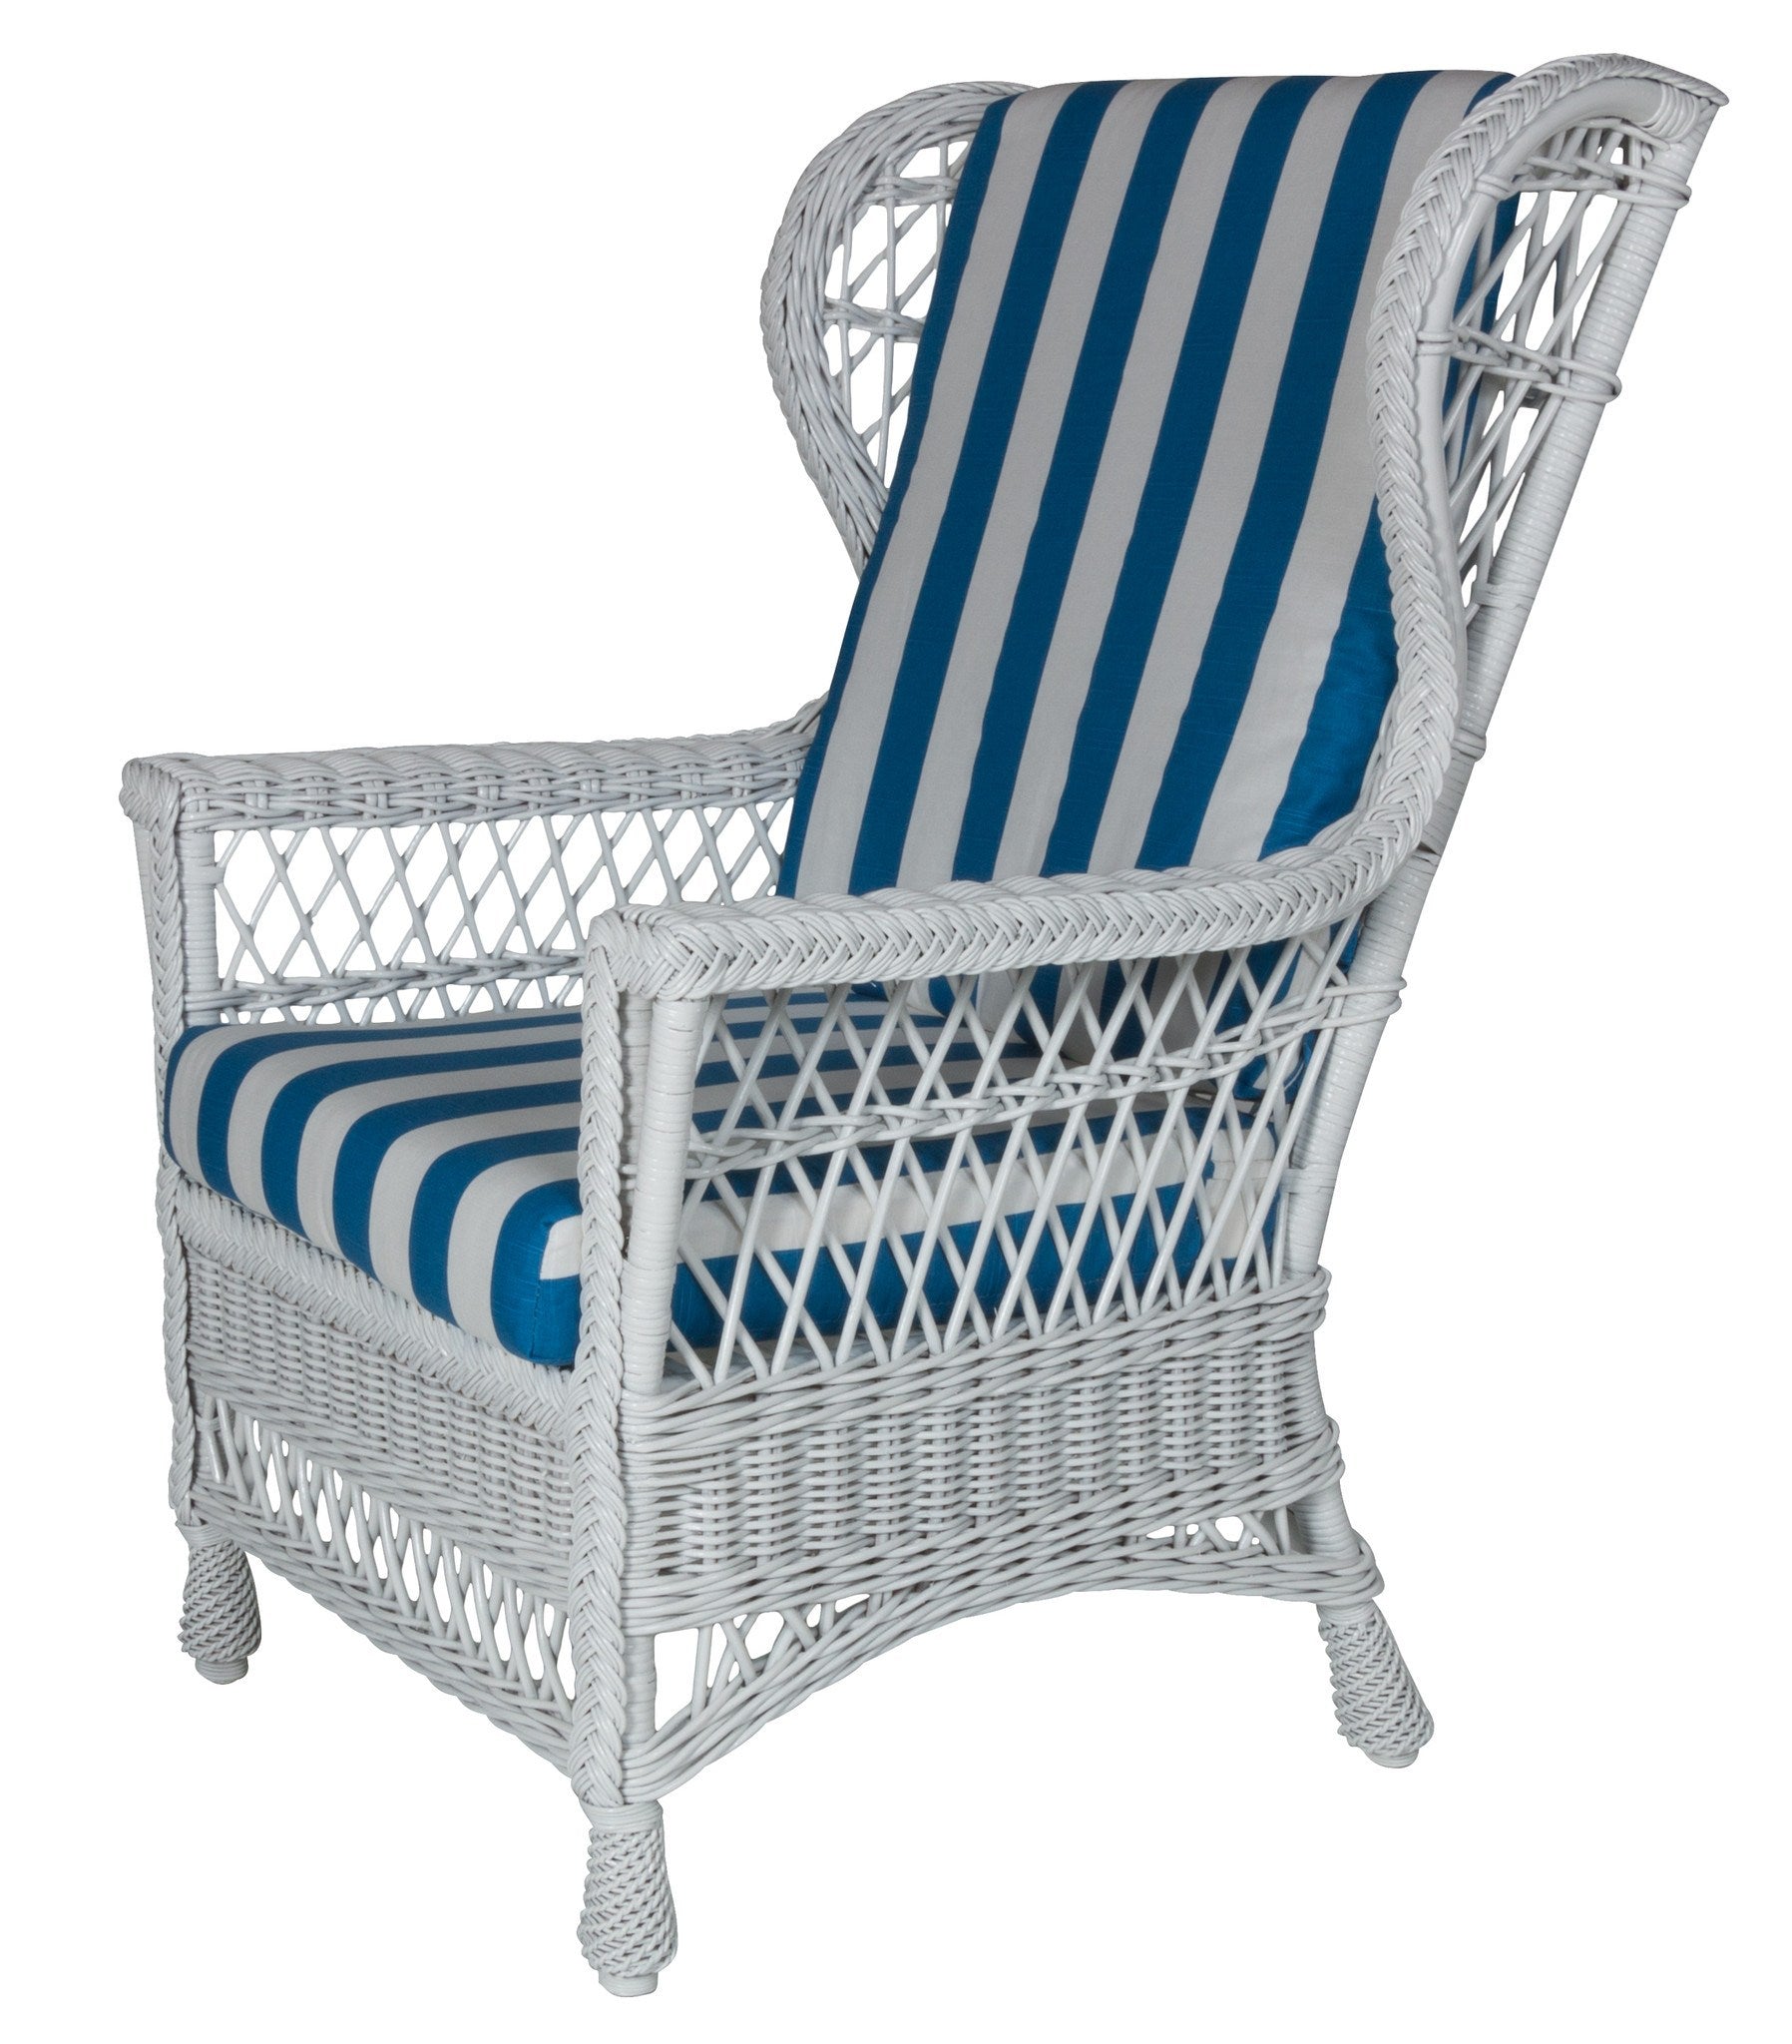 Designer Wicker & Rattan By Tribor Harbor Front Wing Chair by Designer Wicker from Tribor Chair - Rattan Imports